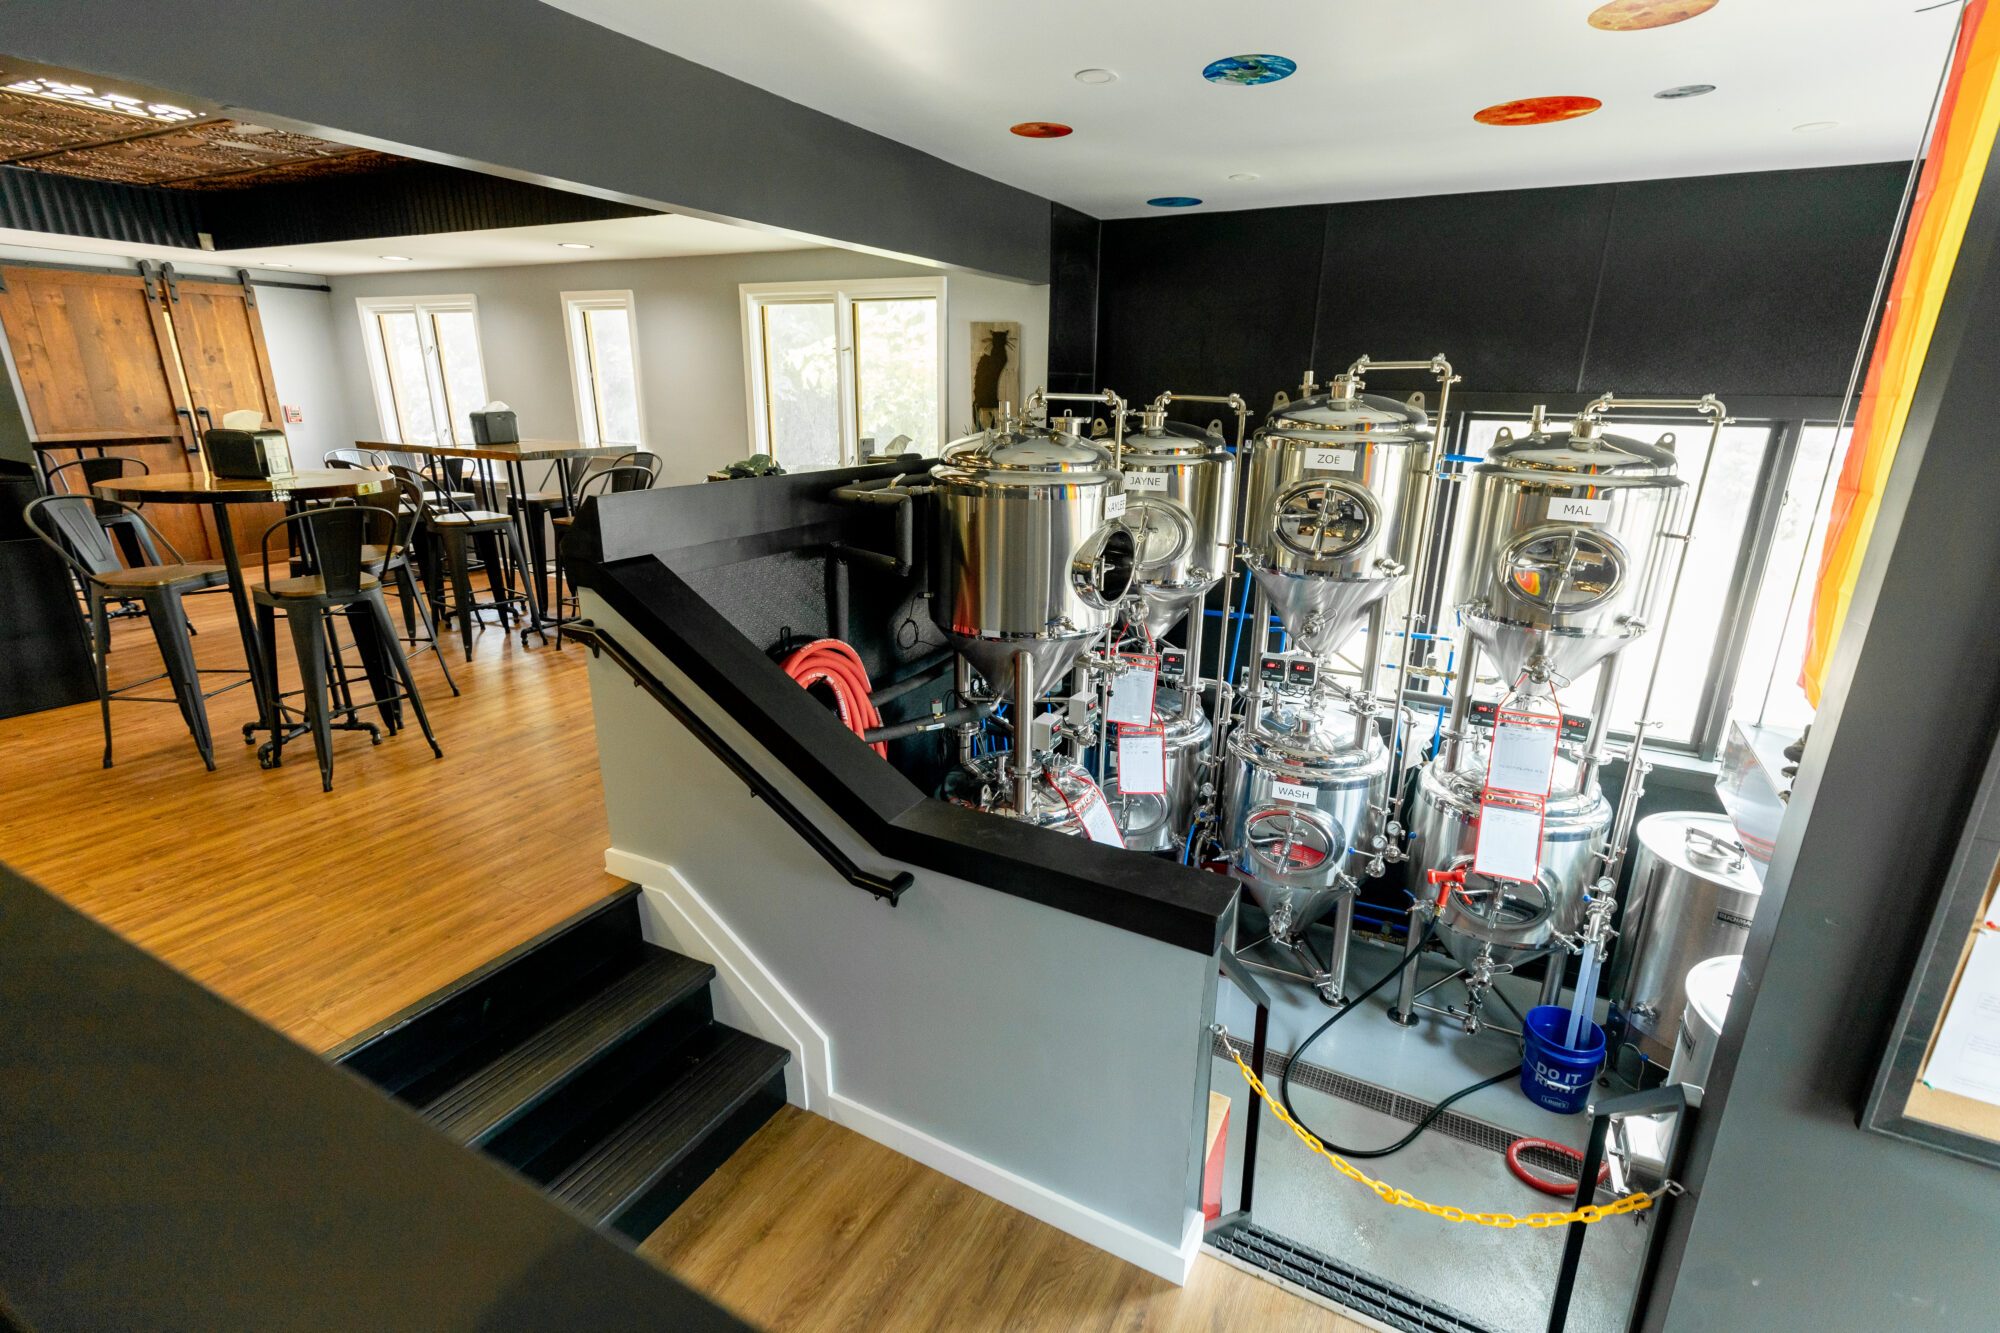 One Eyed Cat Brewing workspace equipped with newly installed brewing machinery